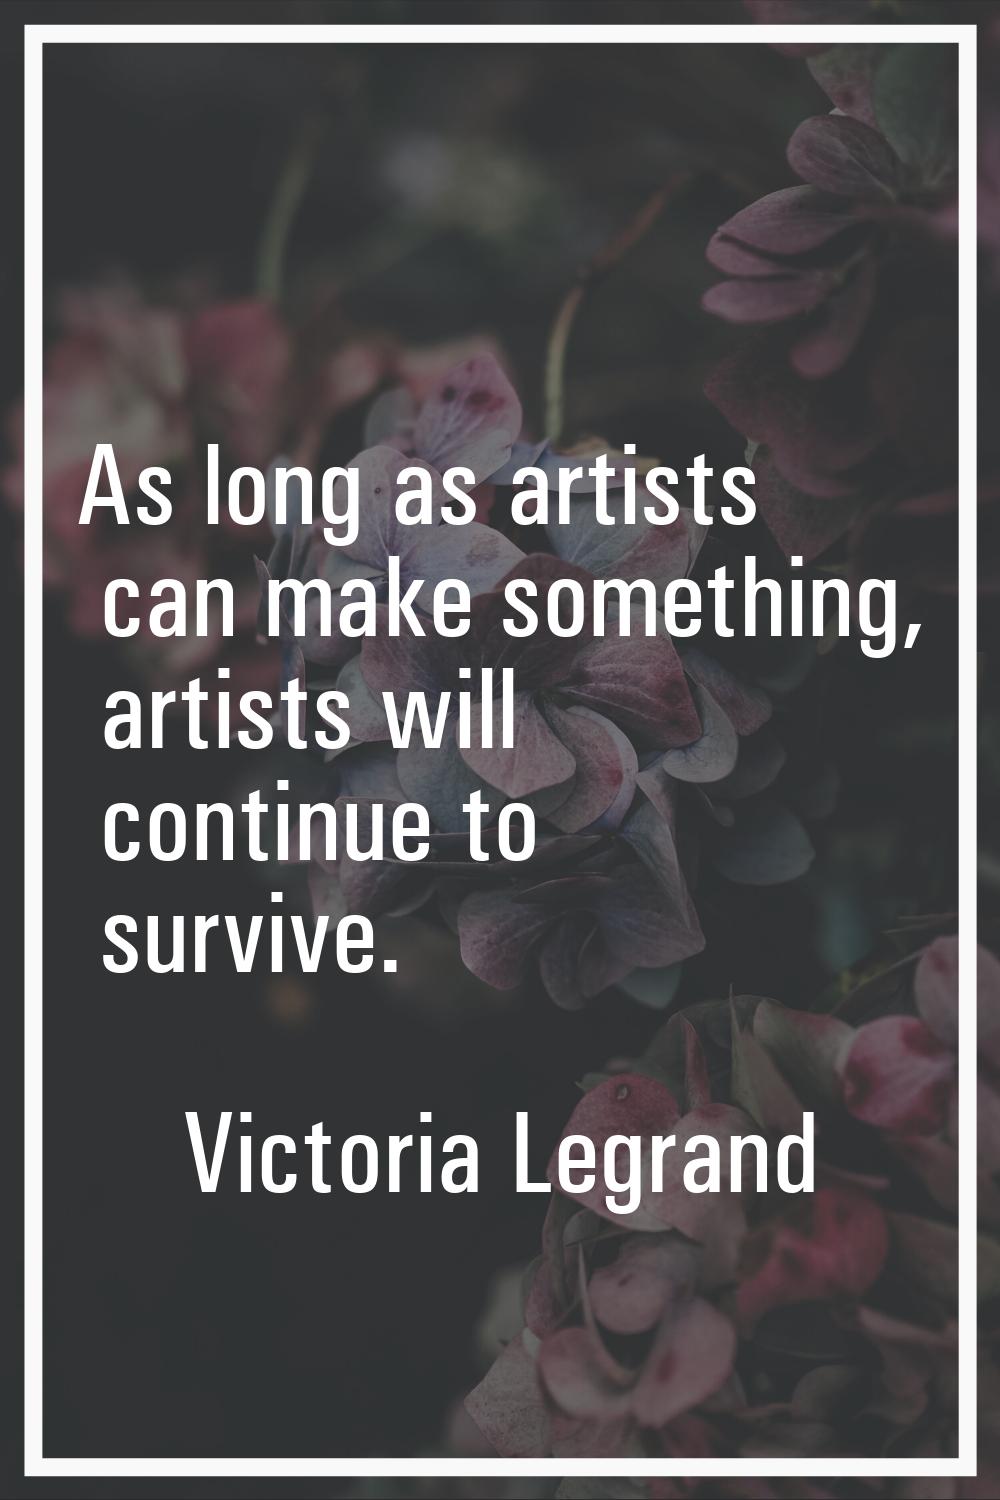 As long as artists can make something, artists will continue to survive.